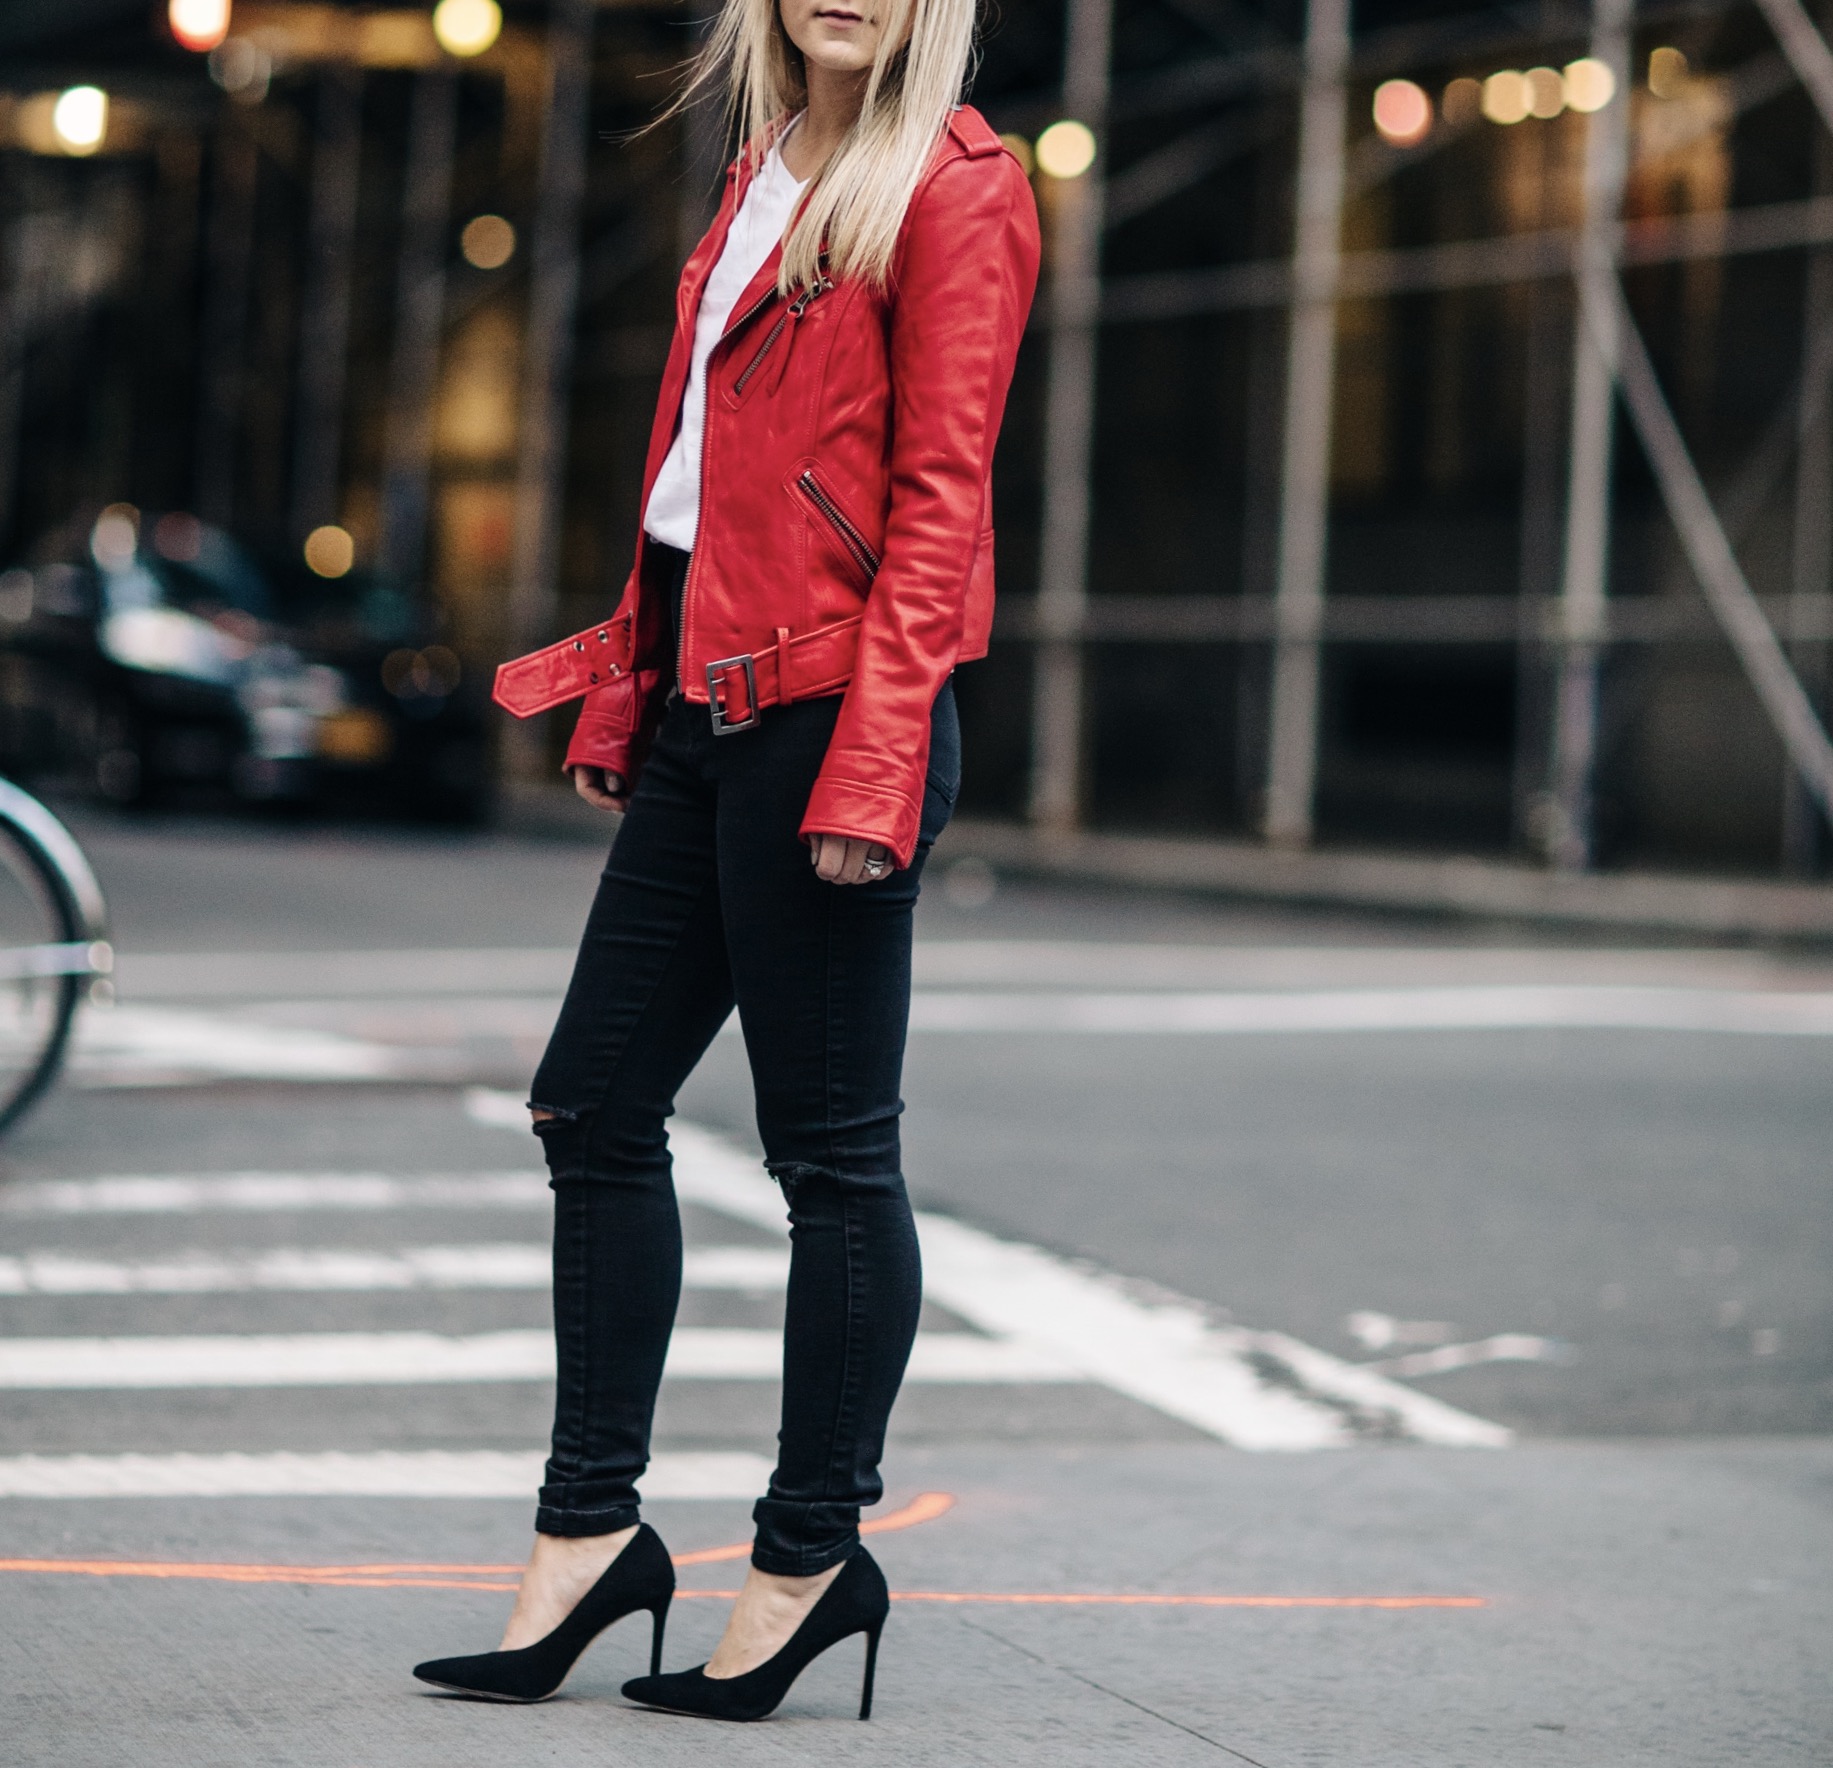 Styling a Red Leather Jacket — christie ferrari